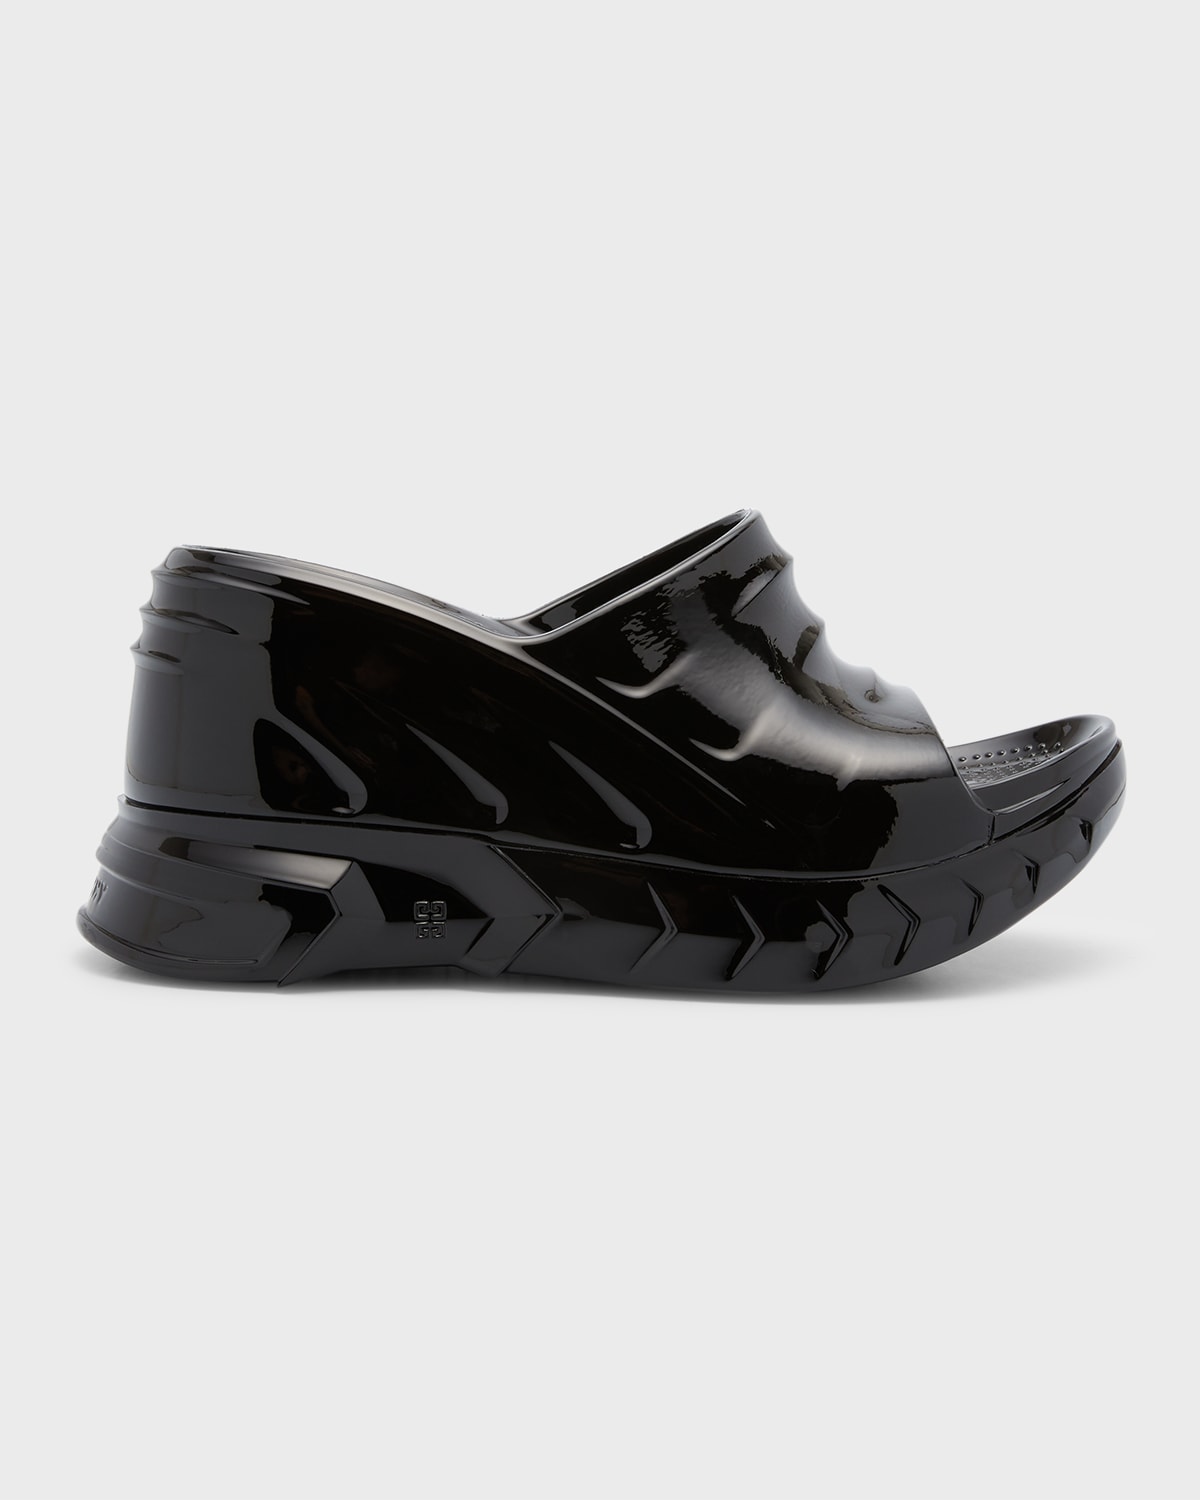 Givenchy Marshmallow Rubber Wedge Slide Sandals In Black